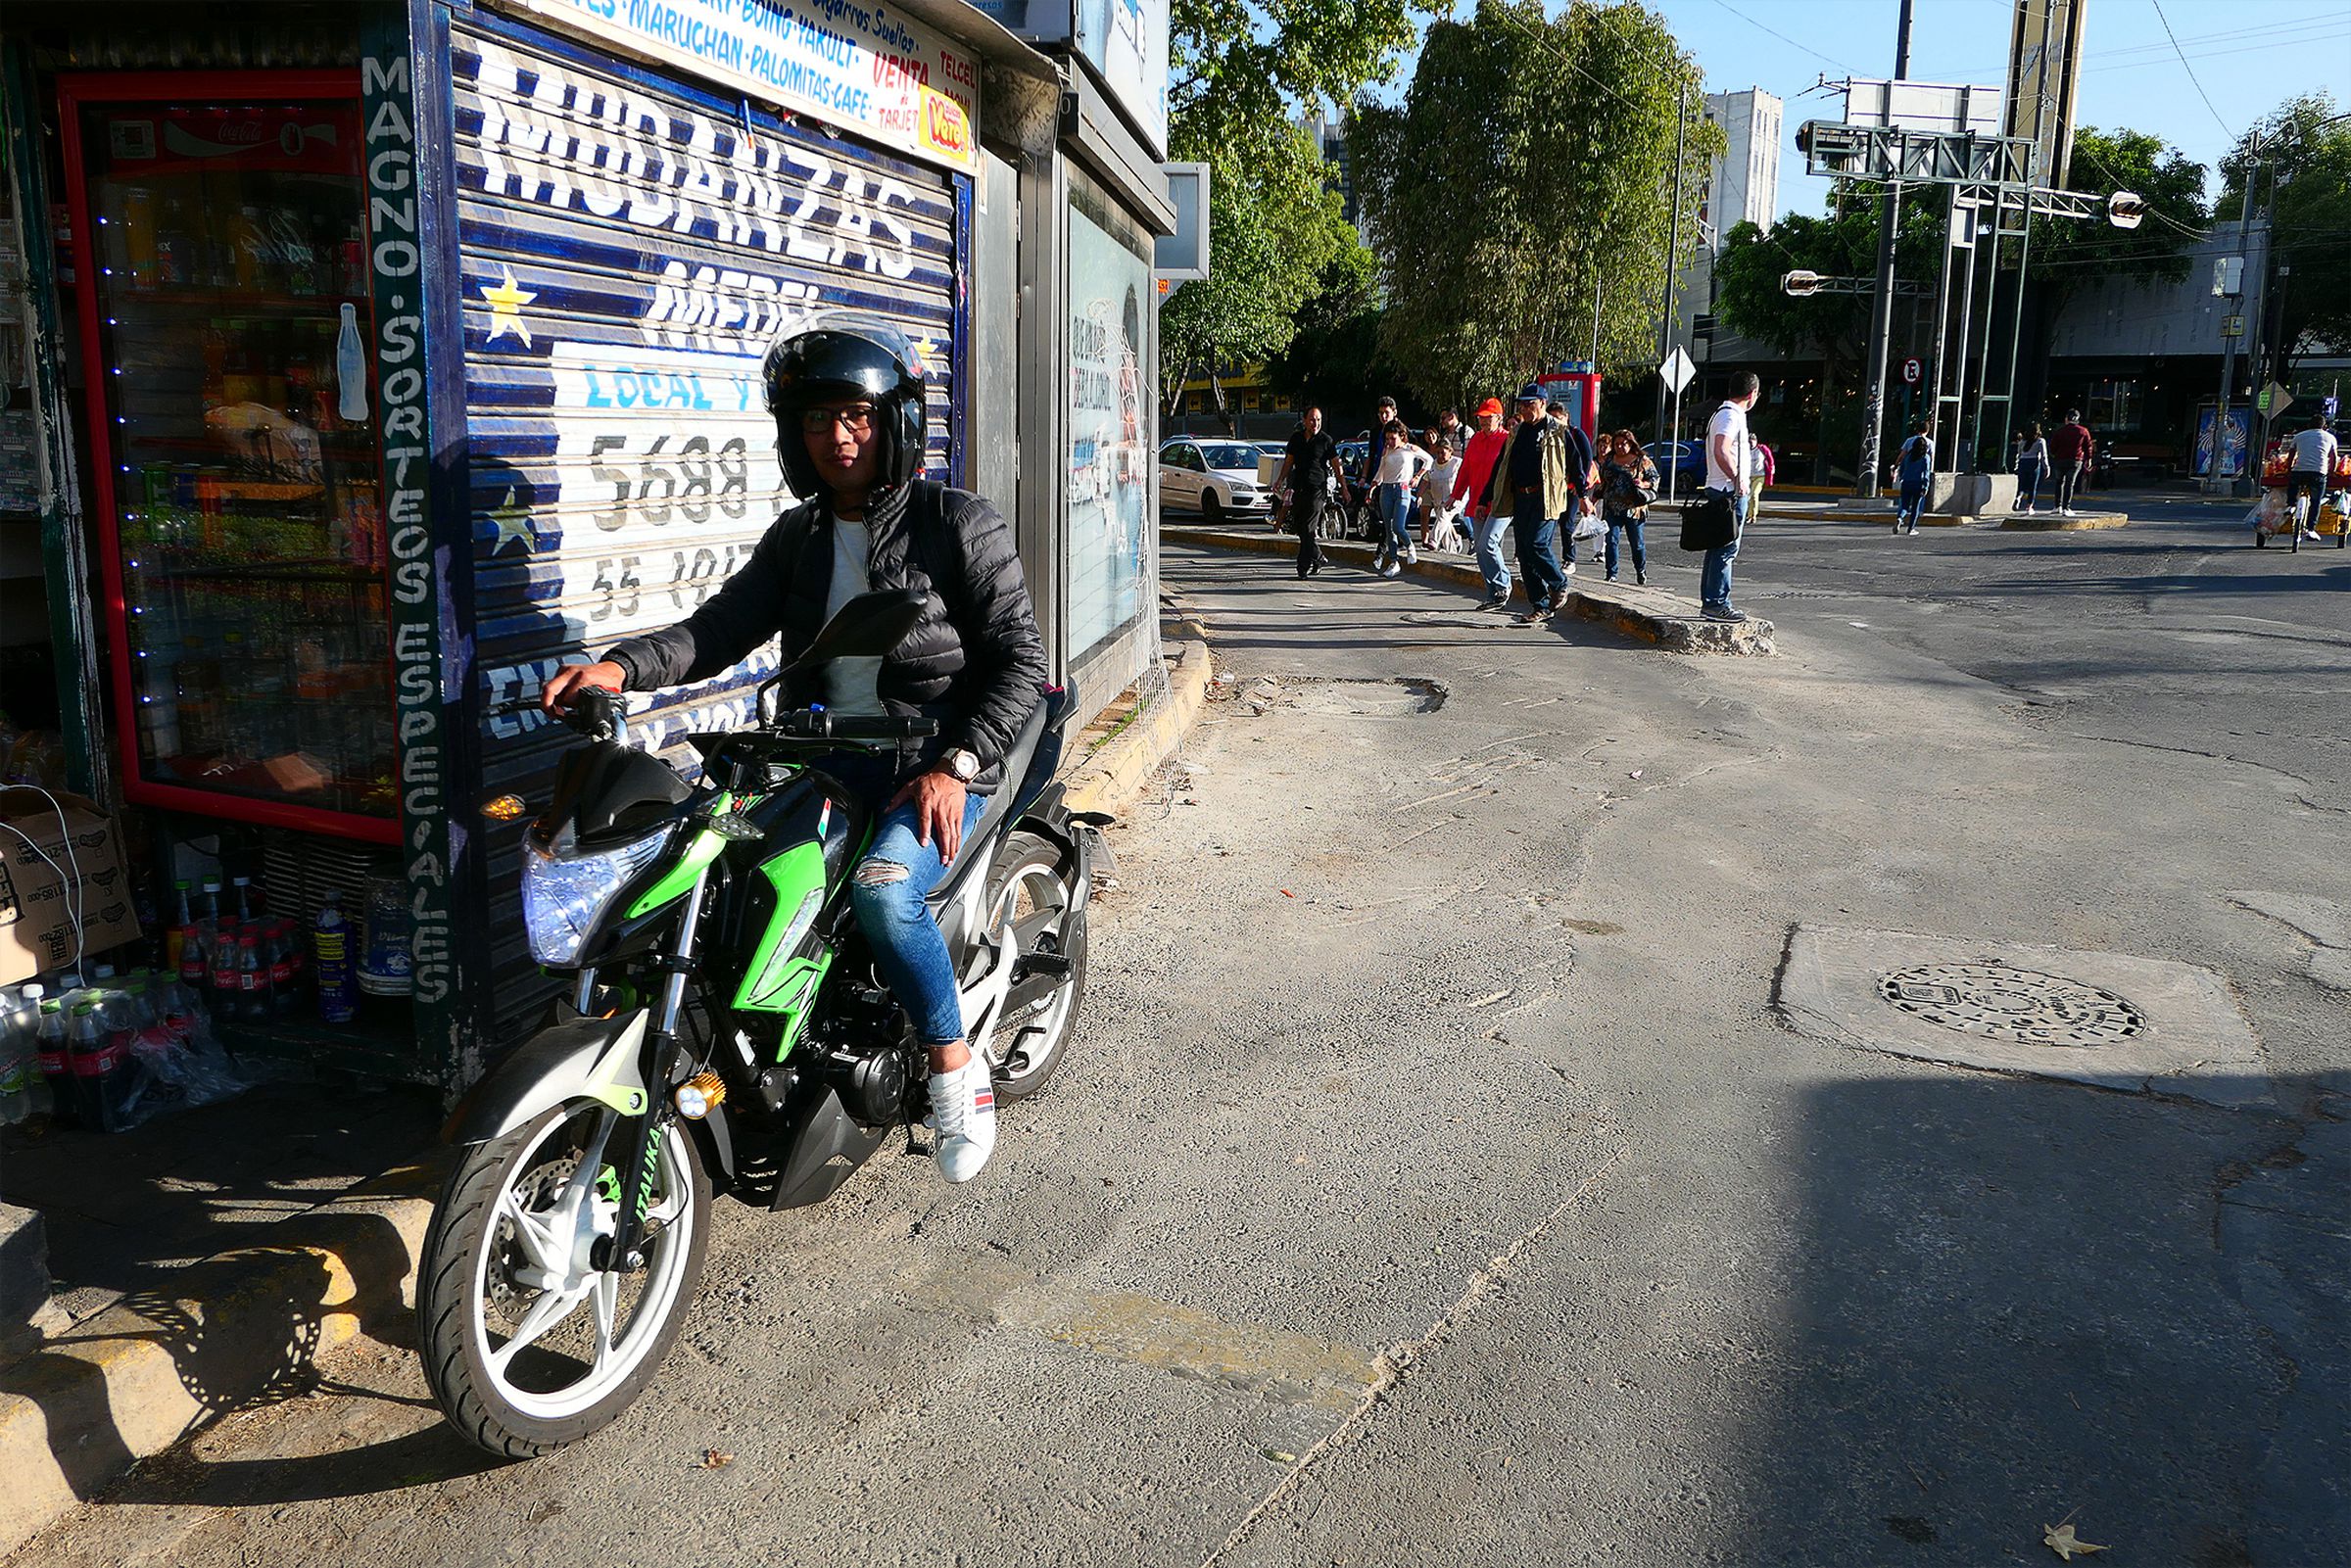 Rosales on his motorcycle in Mexico City